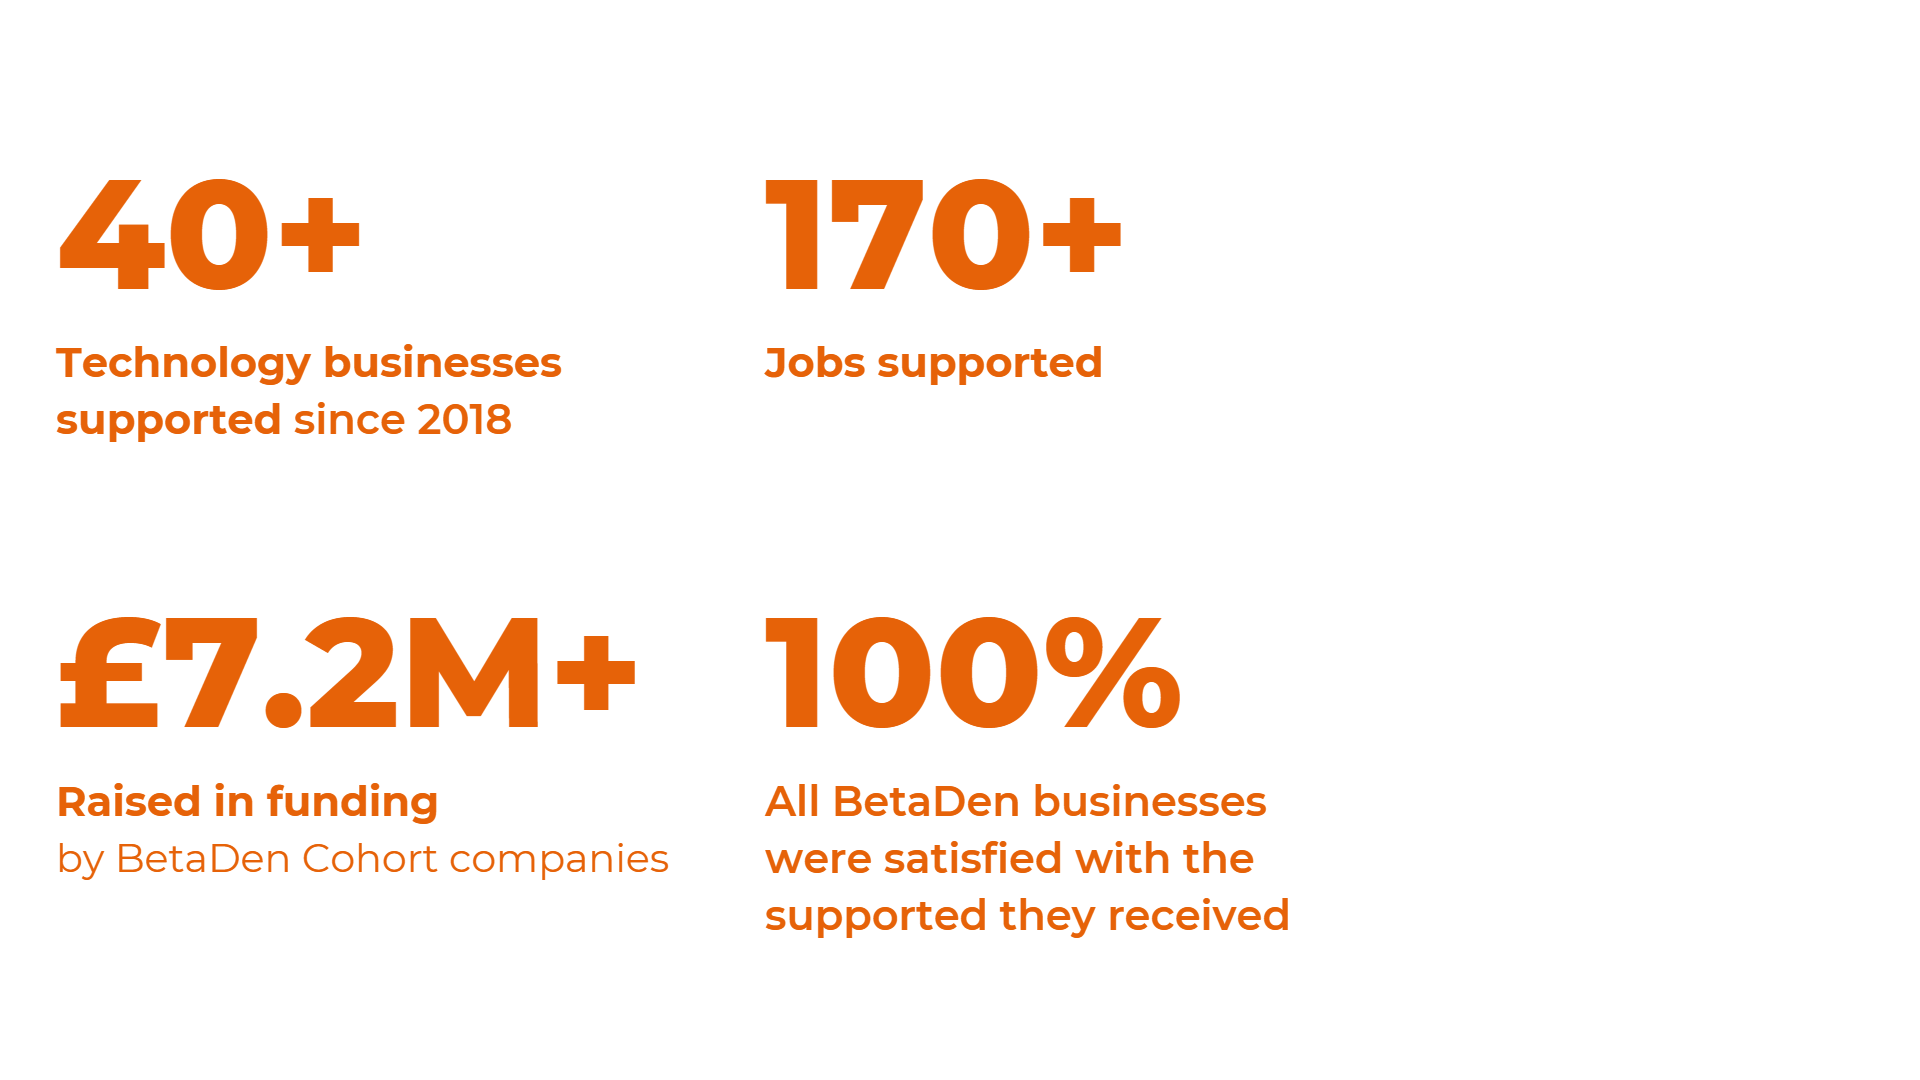 40+ technology businesses supported since 2018, 100+ jobs supported, £6.1+M raised in funding by BetaDen cohort companies, 100% All BetaDen Businesses were satisfied with the support they received